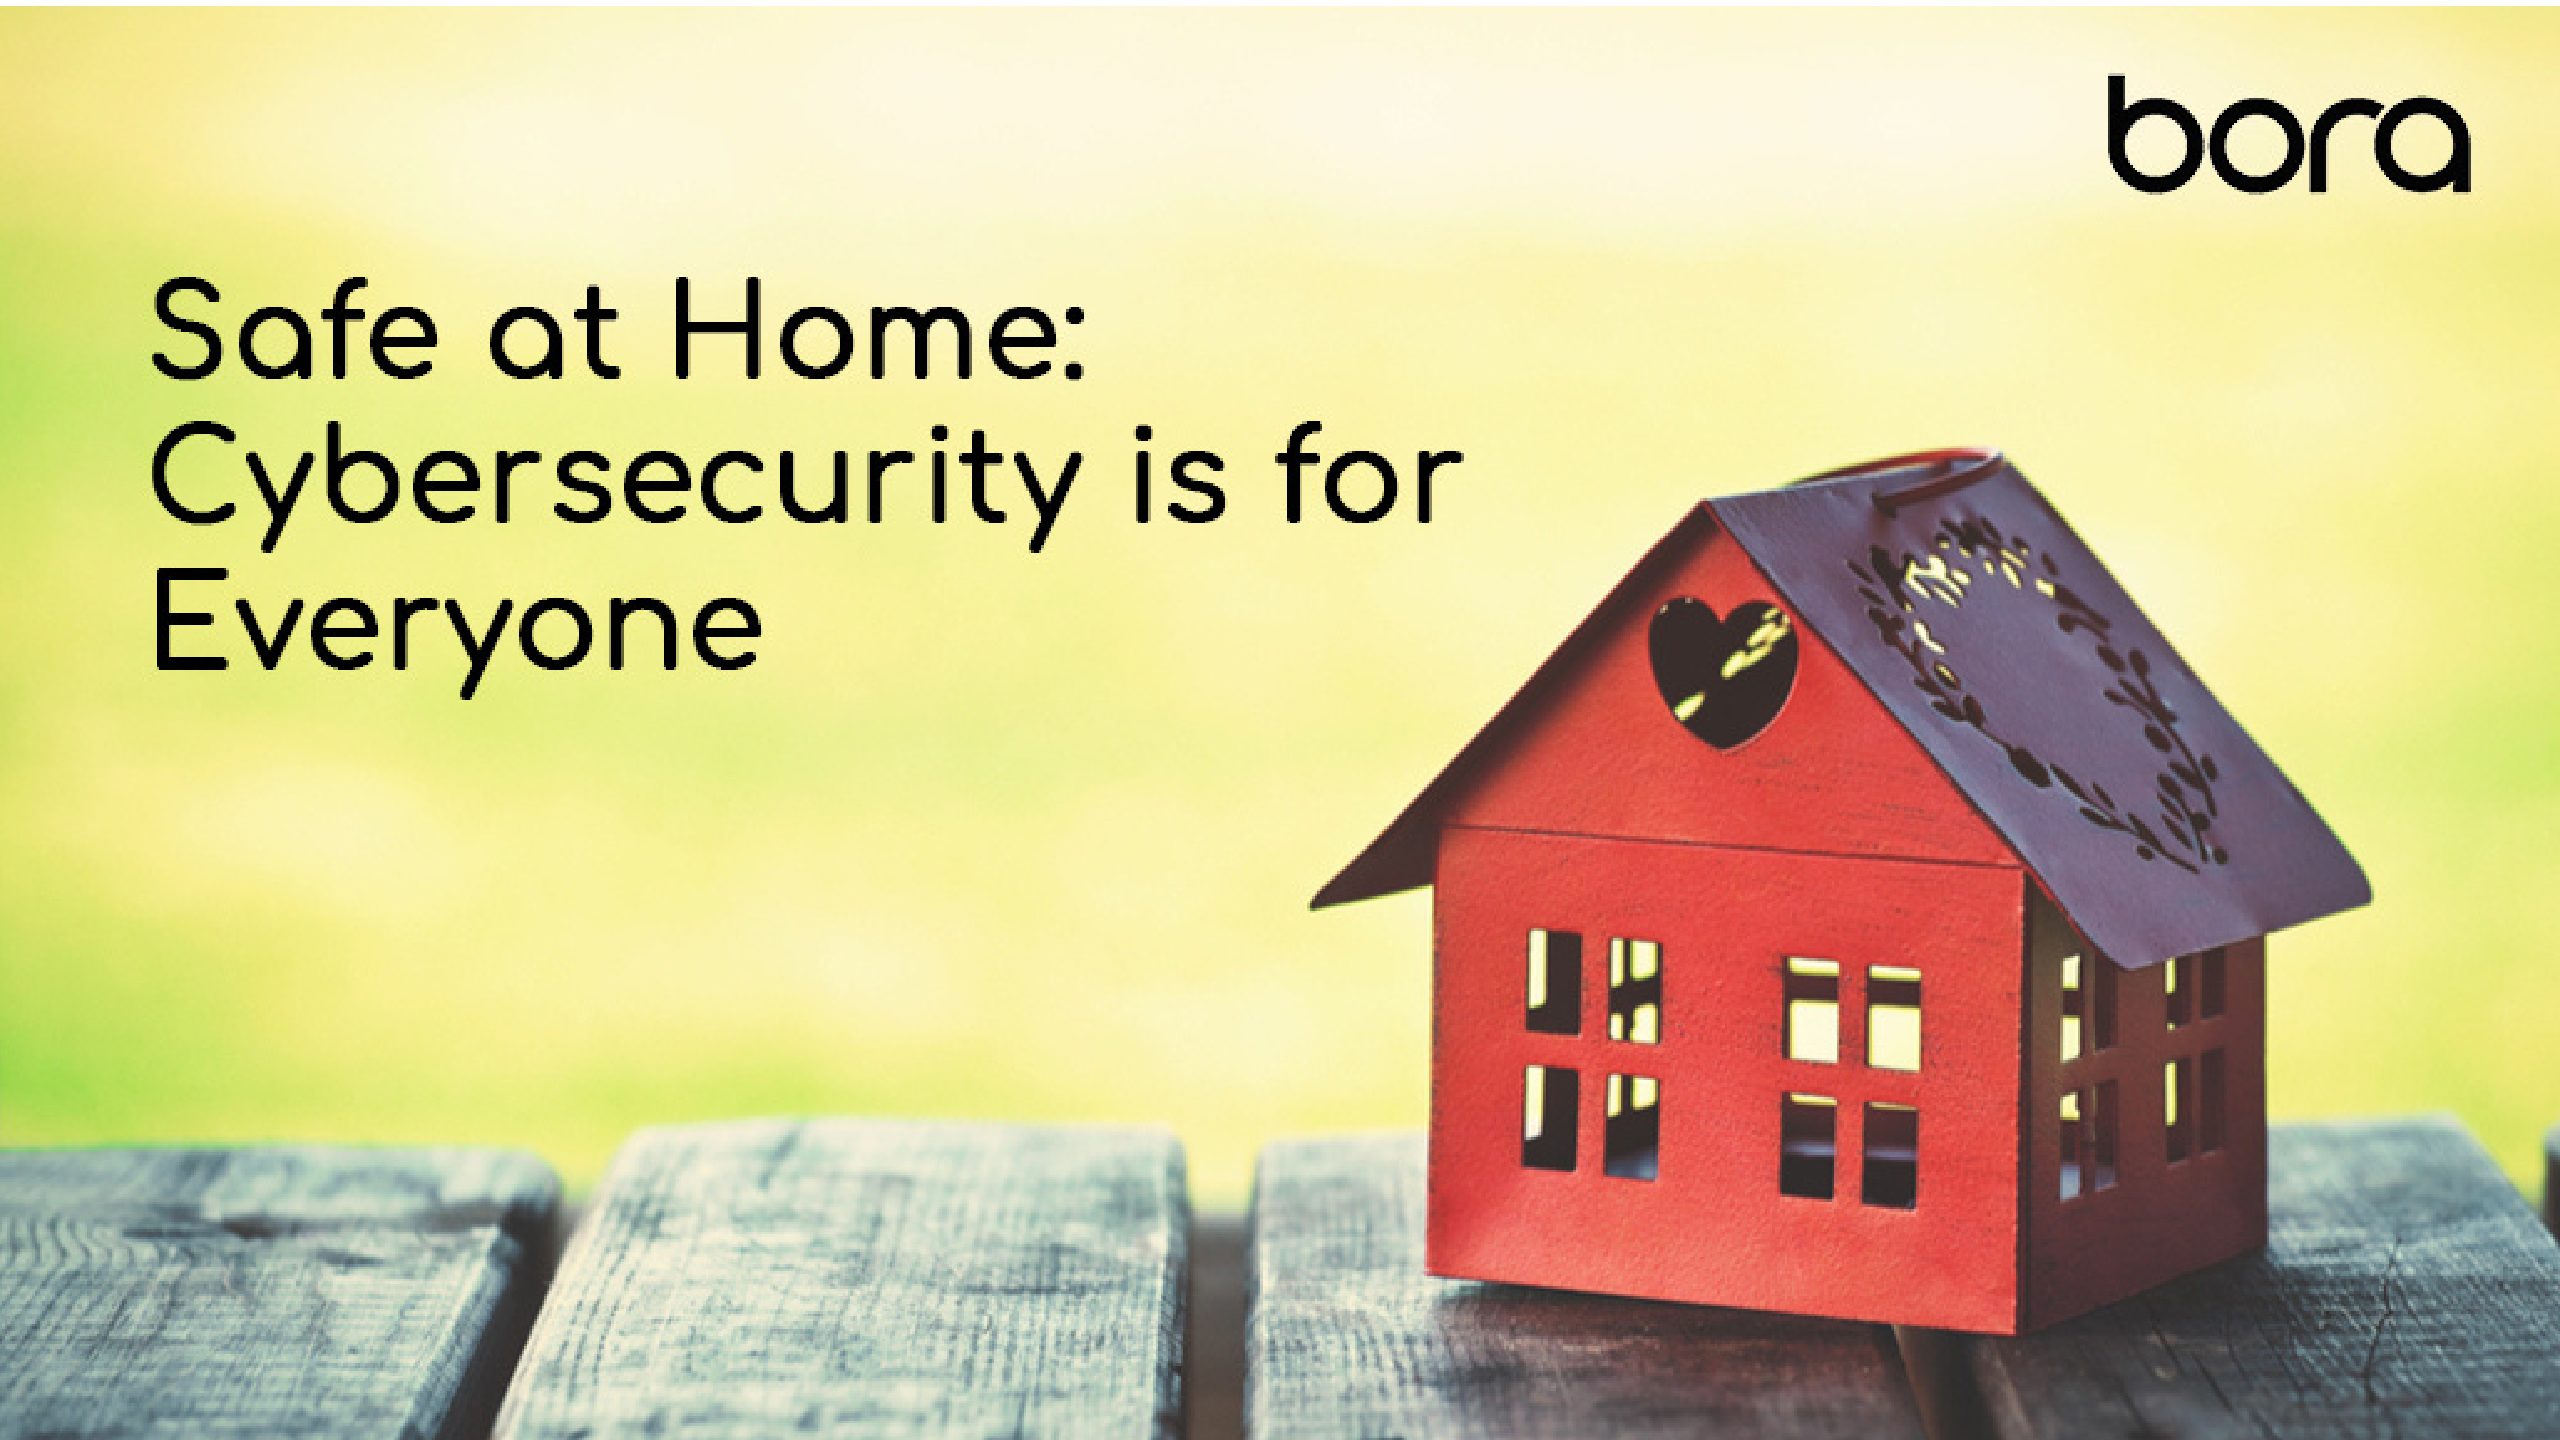 Safe at Home: Cybersecurity is for Everyone